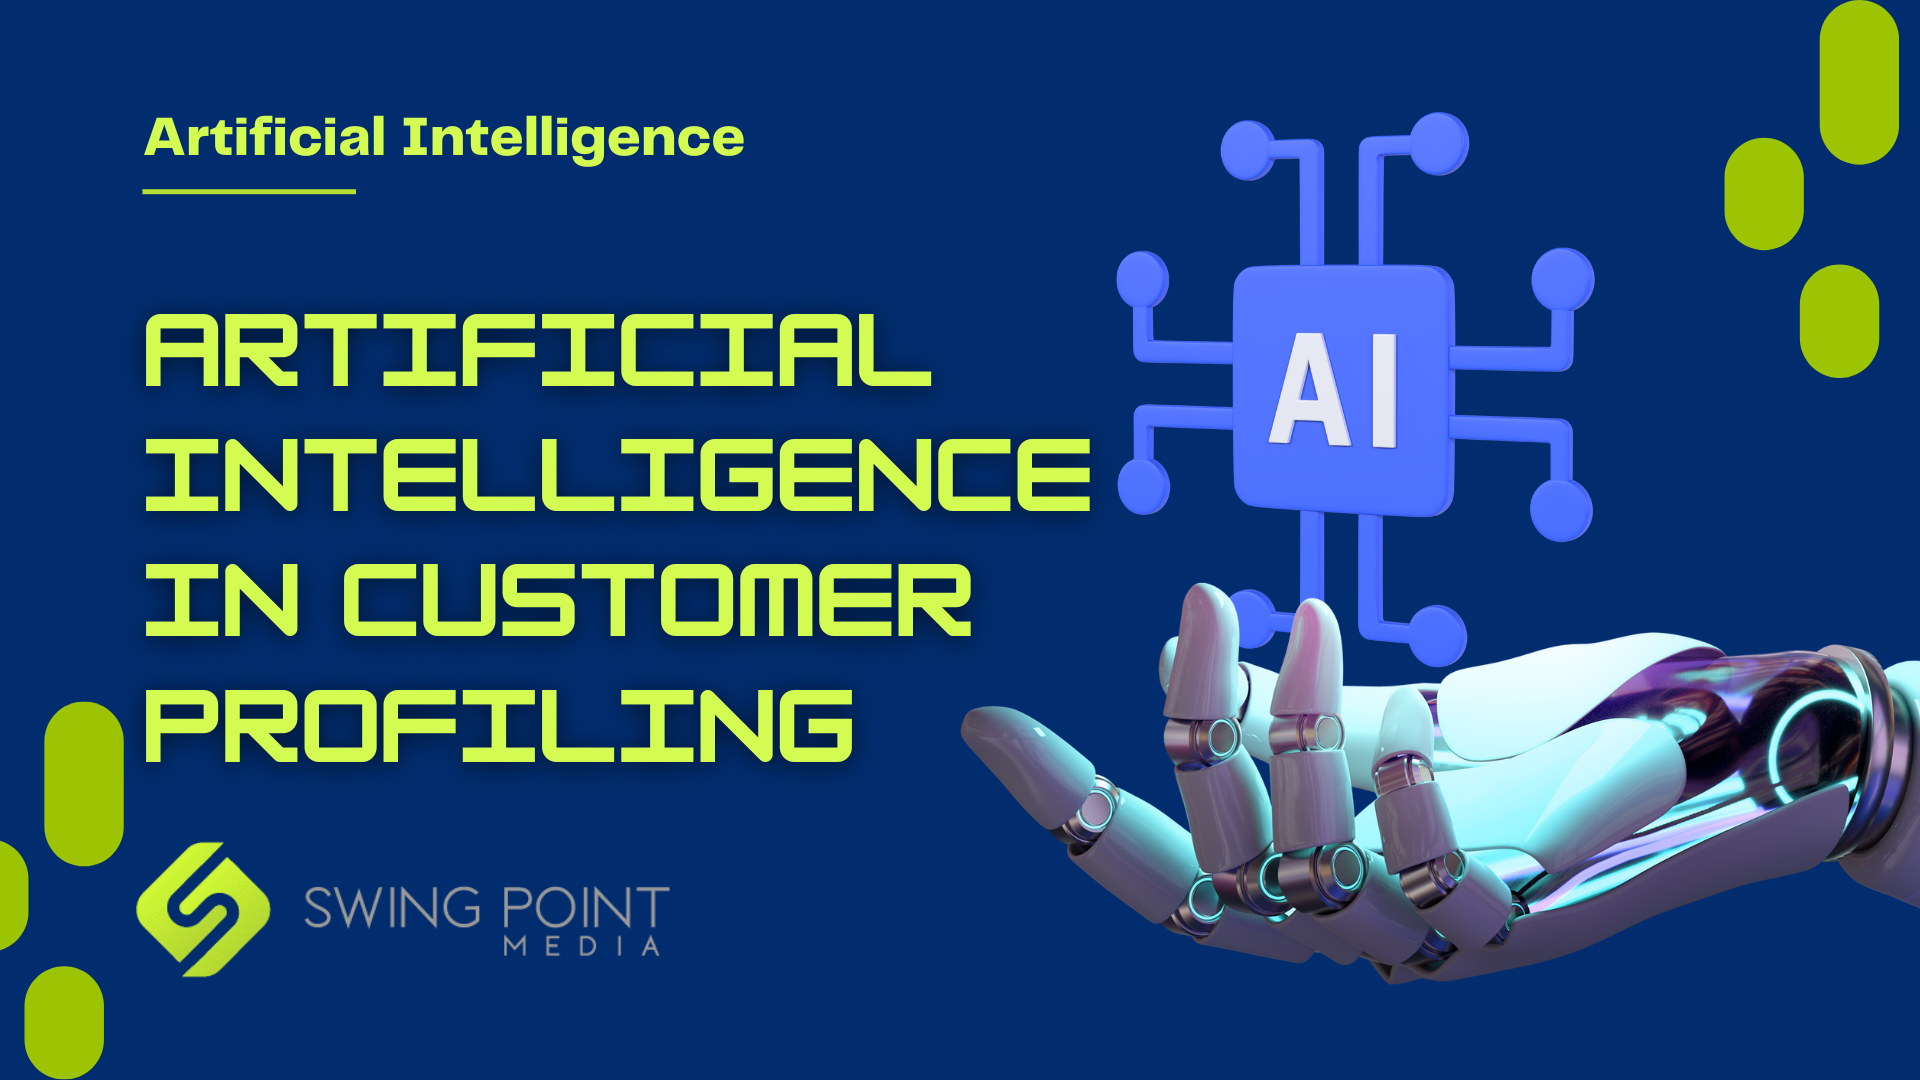 Role of Artificial Intelligence in Customer Profiling